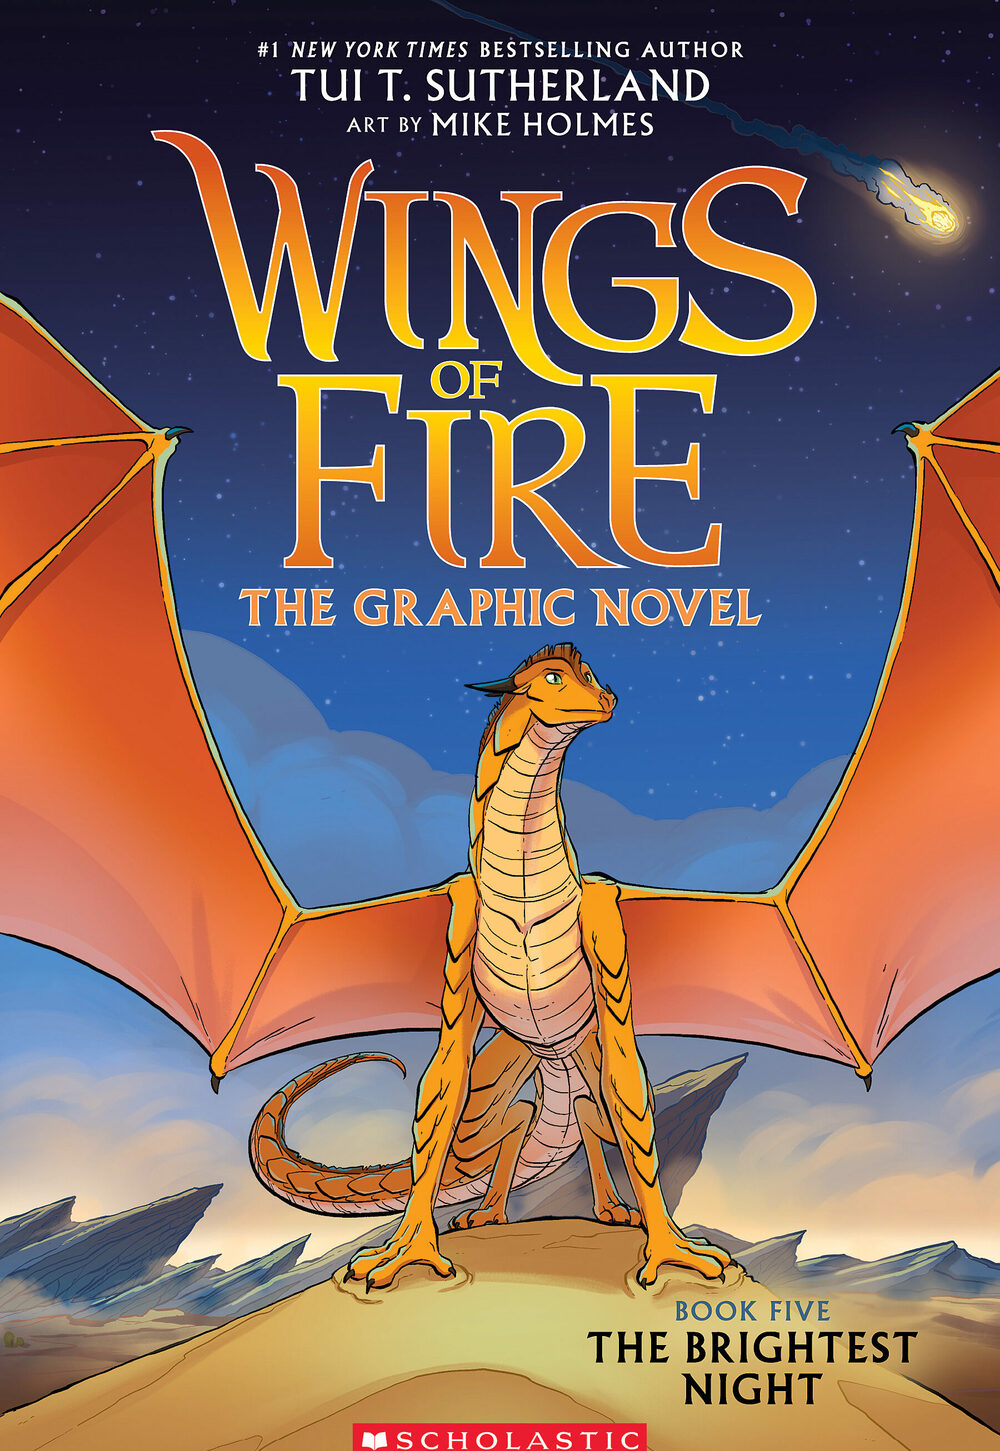 wings of fire book review pdf free download